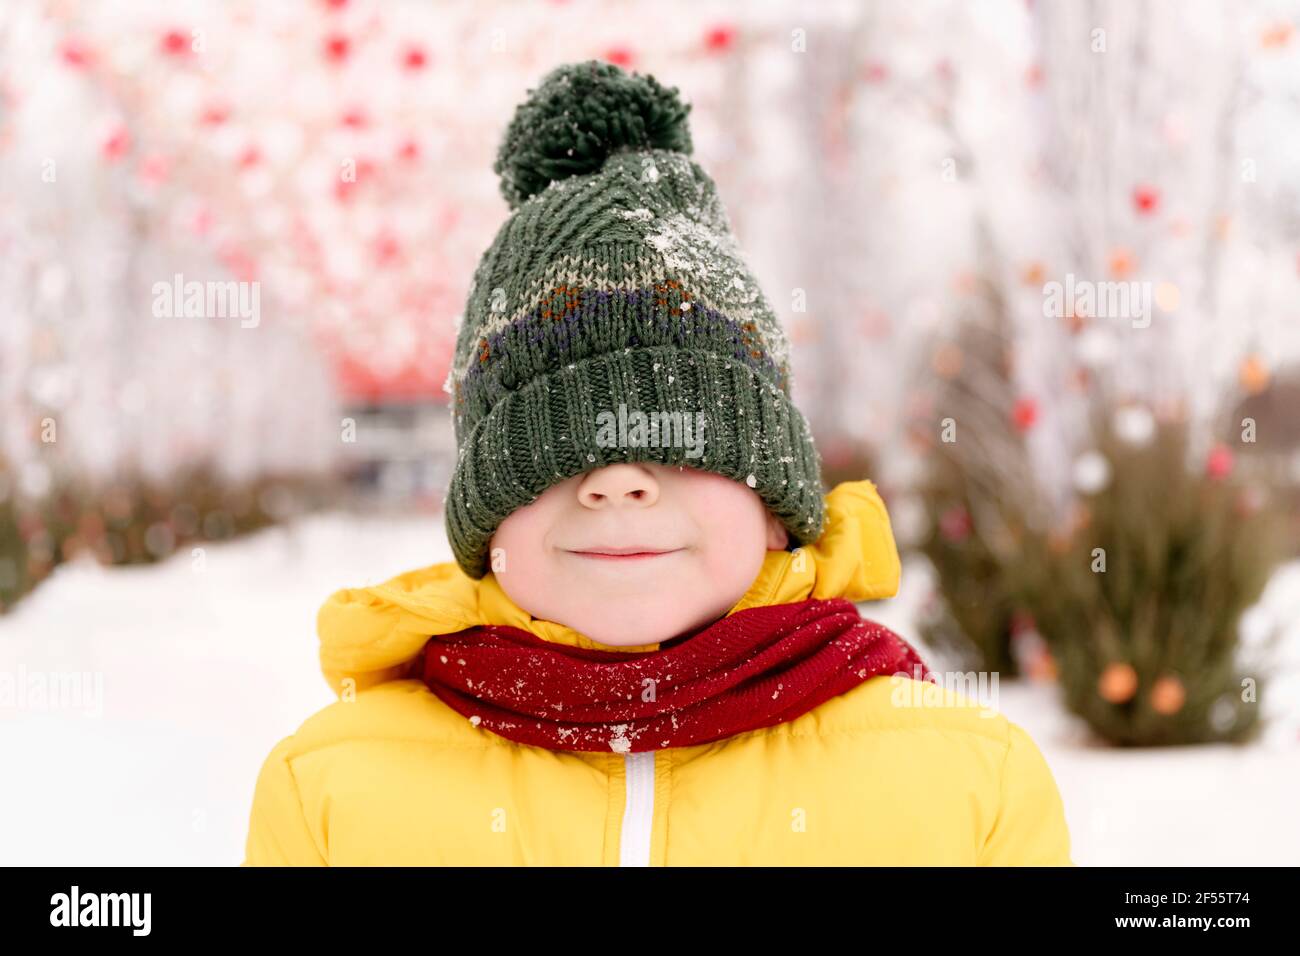 Boy hiding his face with knit hat Stock Photo